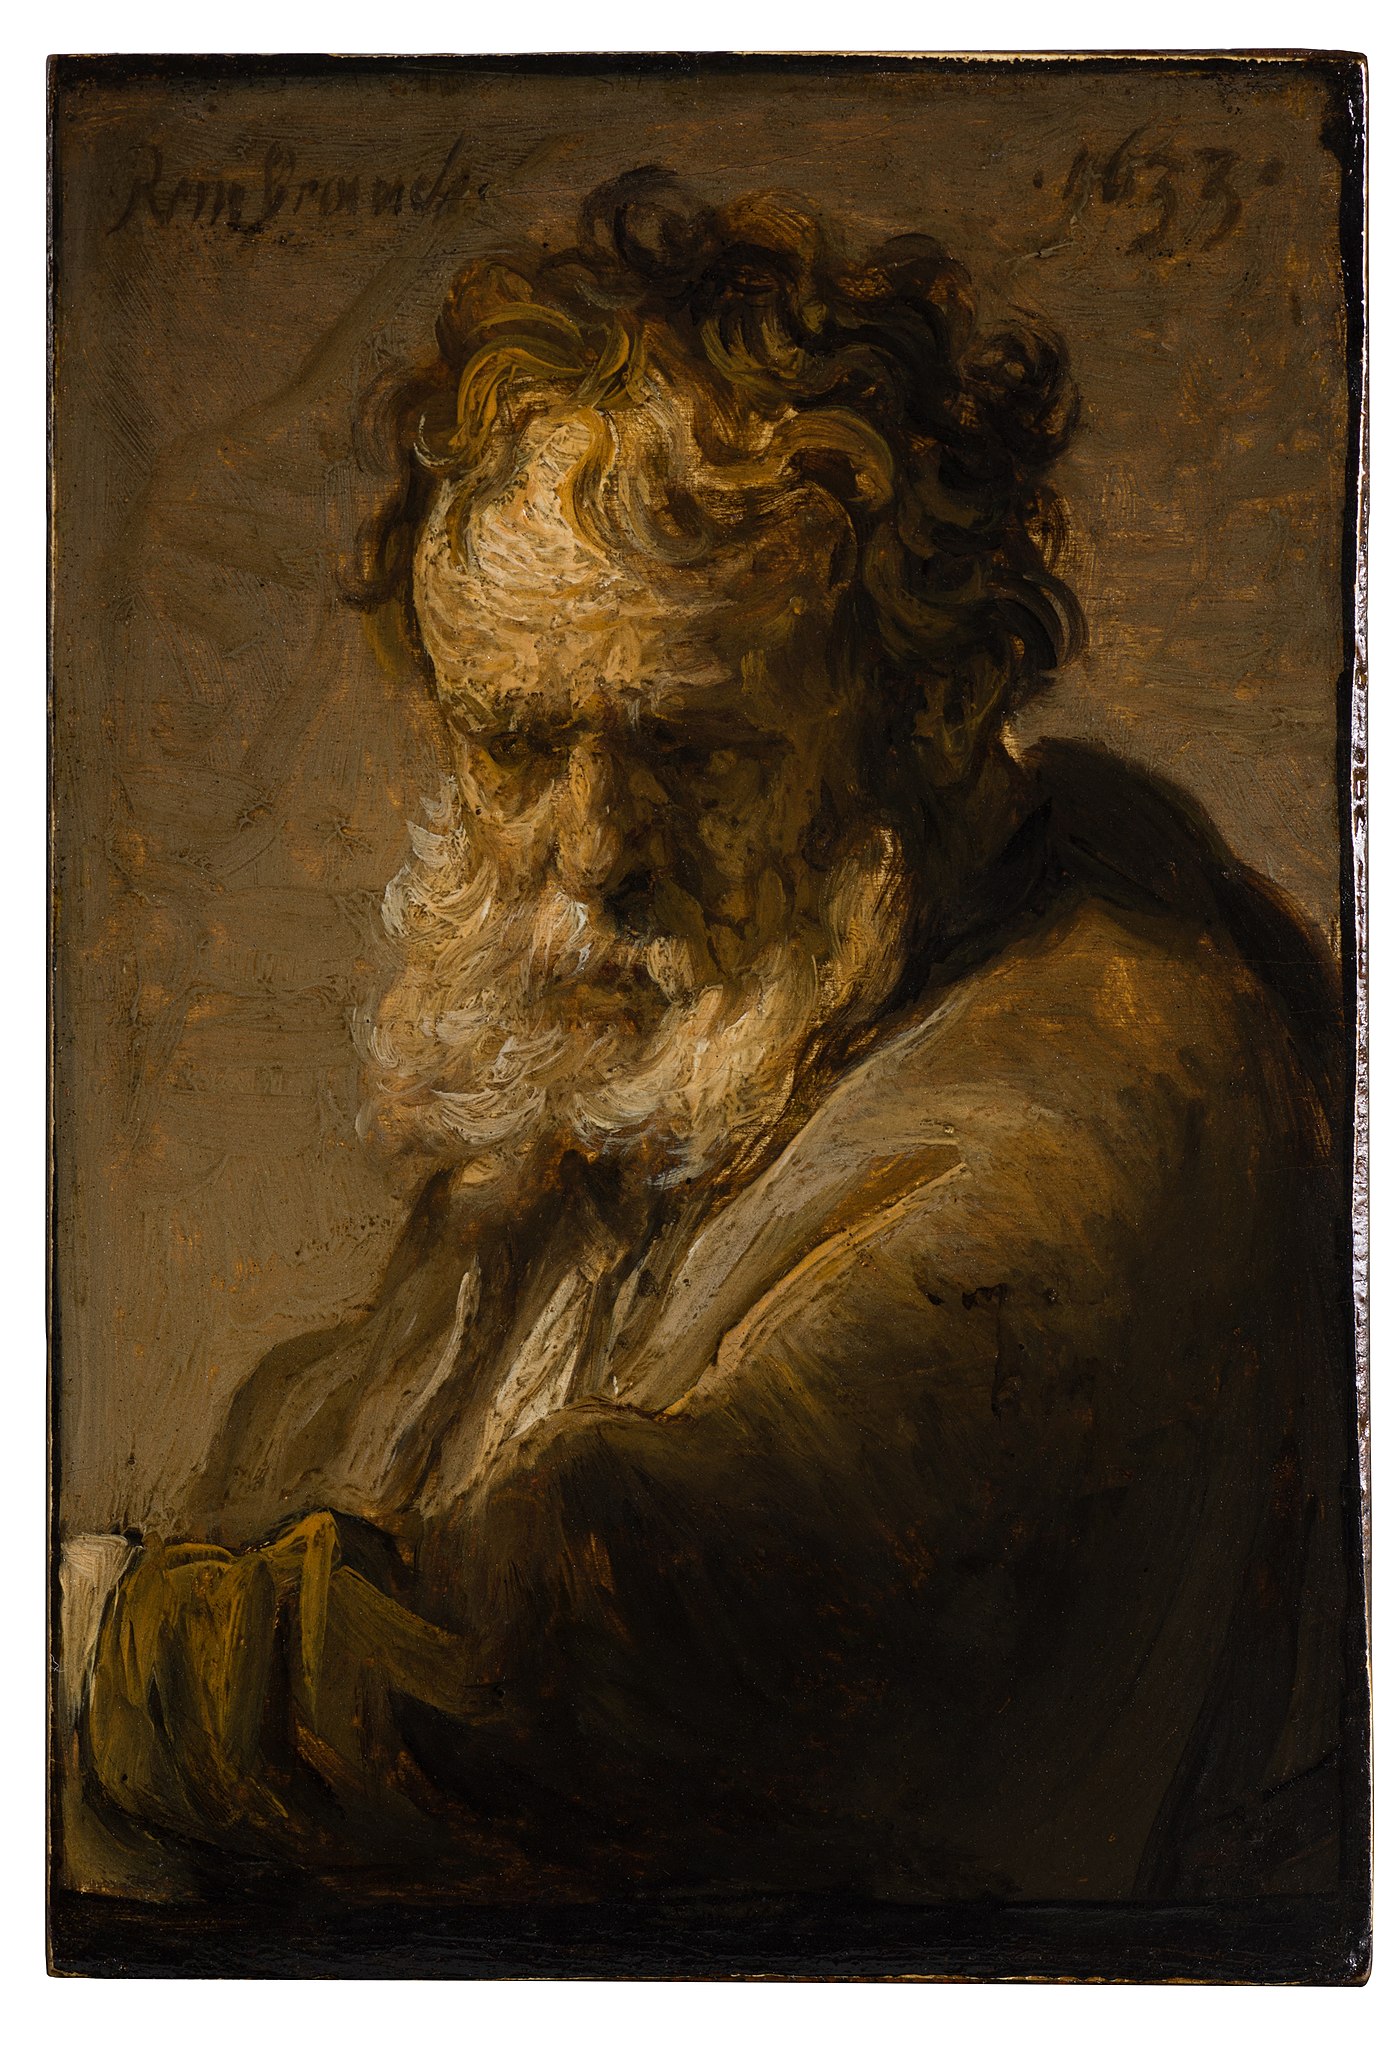 A Rembrandt masterpiece featuring an aged man with a beard.